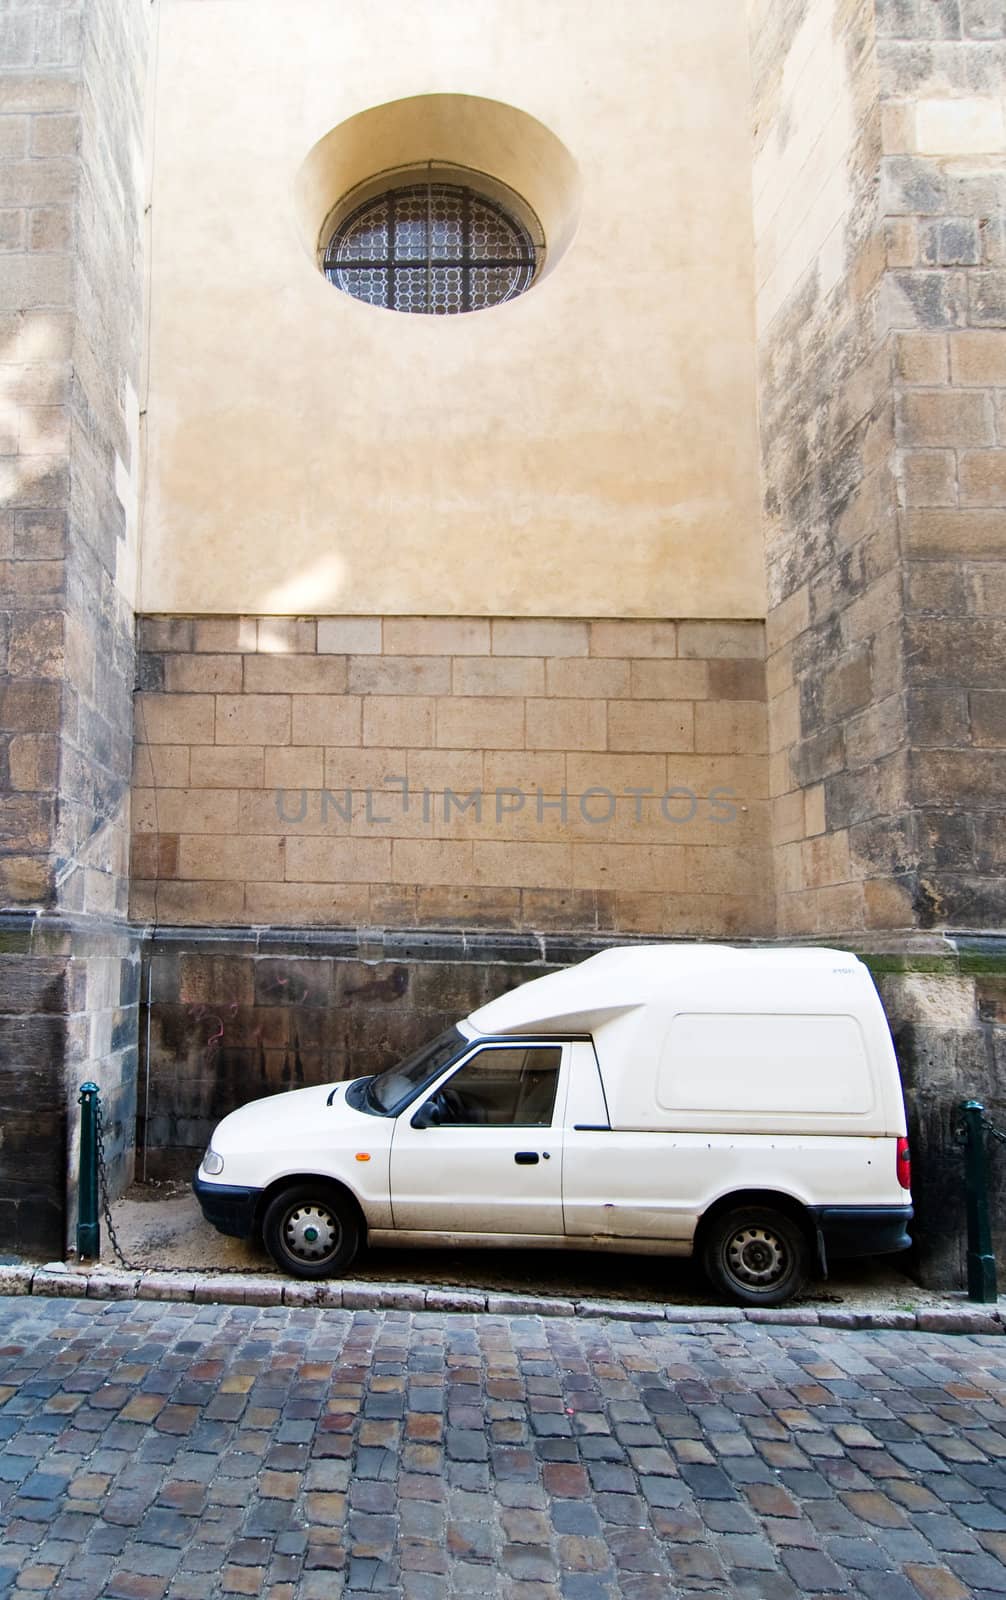 A humorous image of a cargo truck parked between two large buttresses at the St. Giles Church, Prague, Czech Republic.